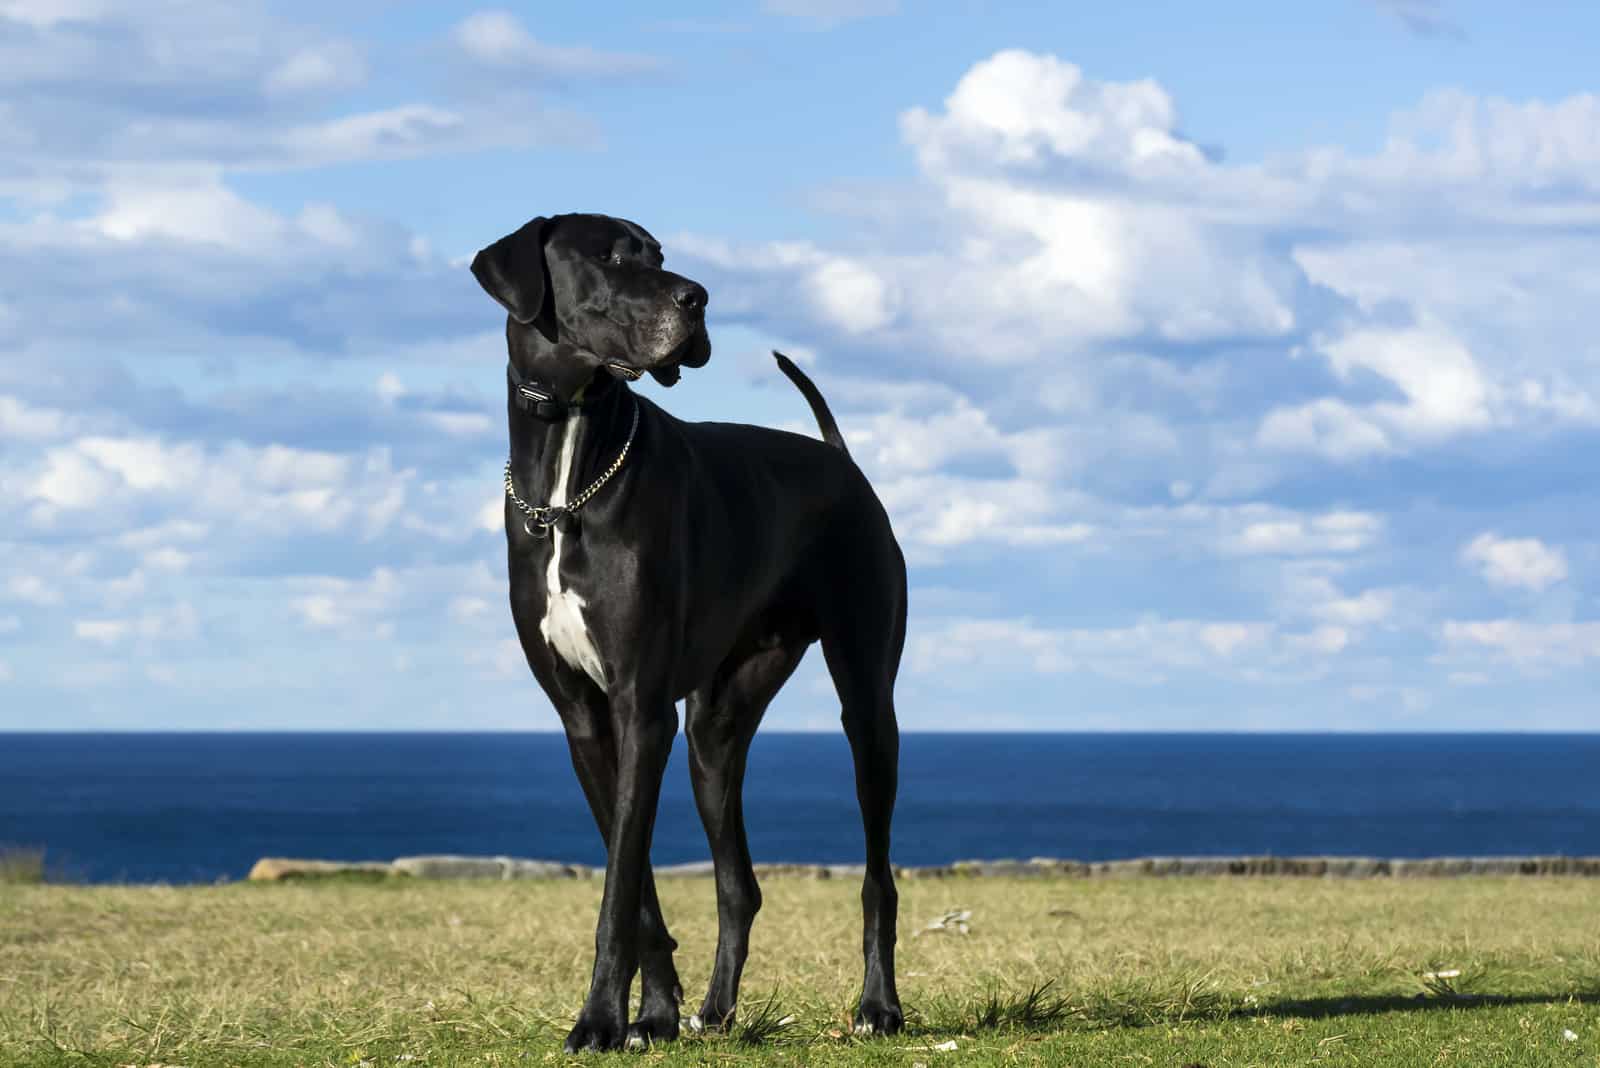 Great Dane stands on the beach